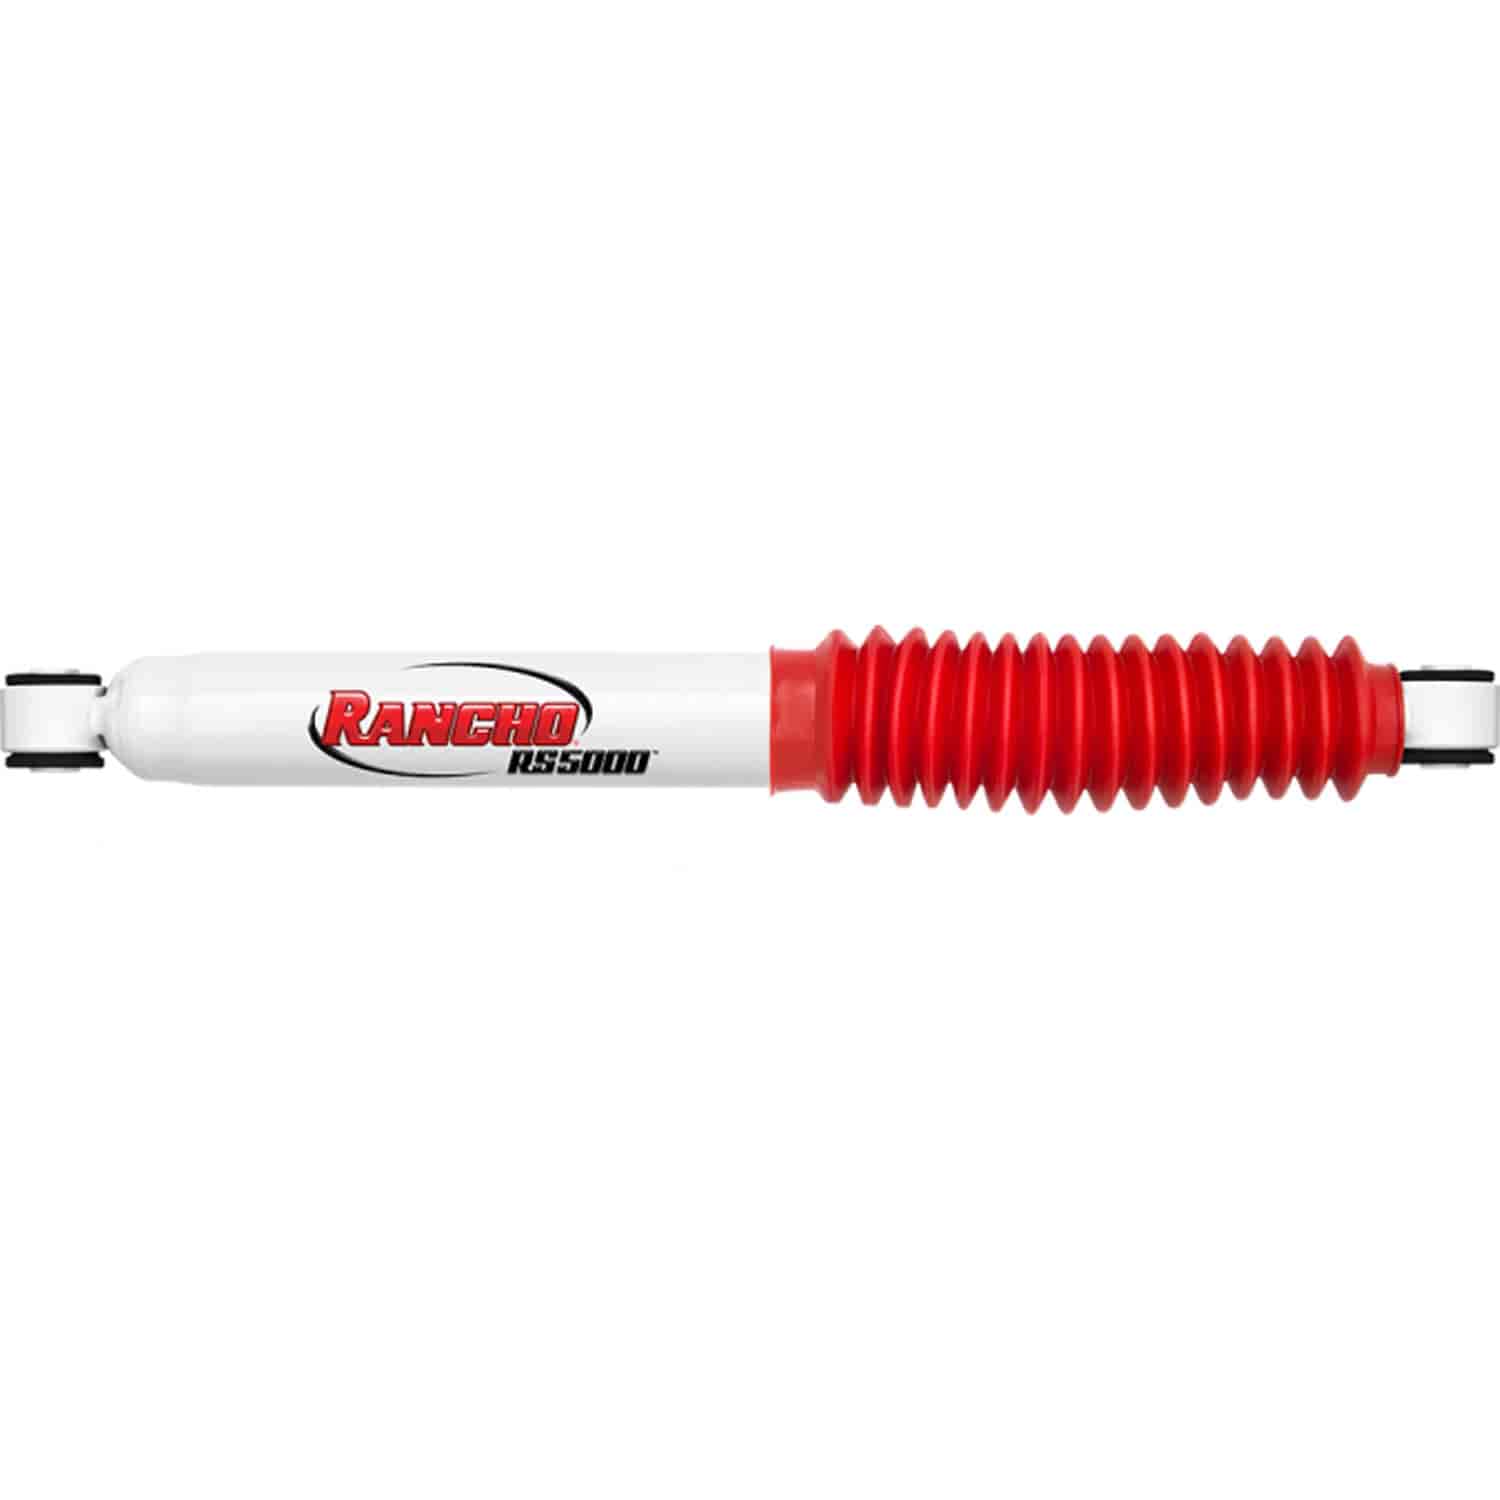 RS5000 Rear Shock Absorber Fits Ford Expedition